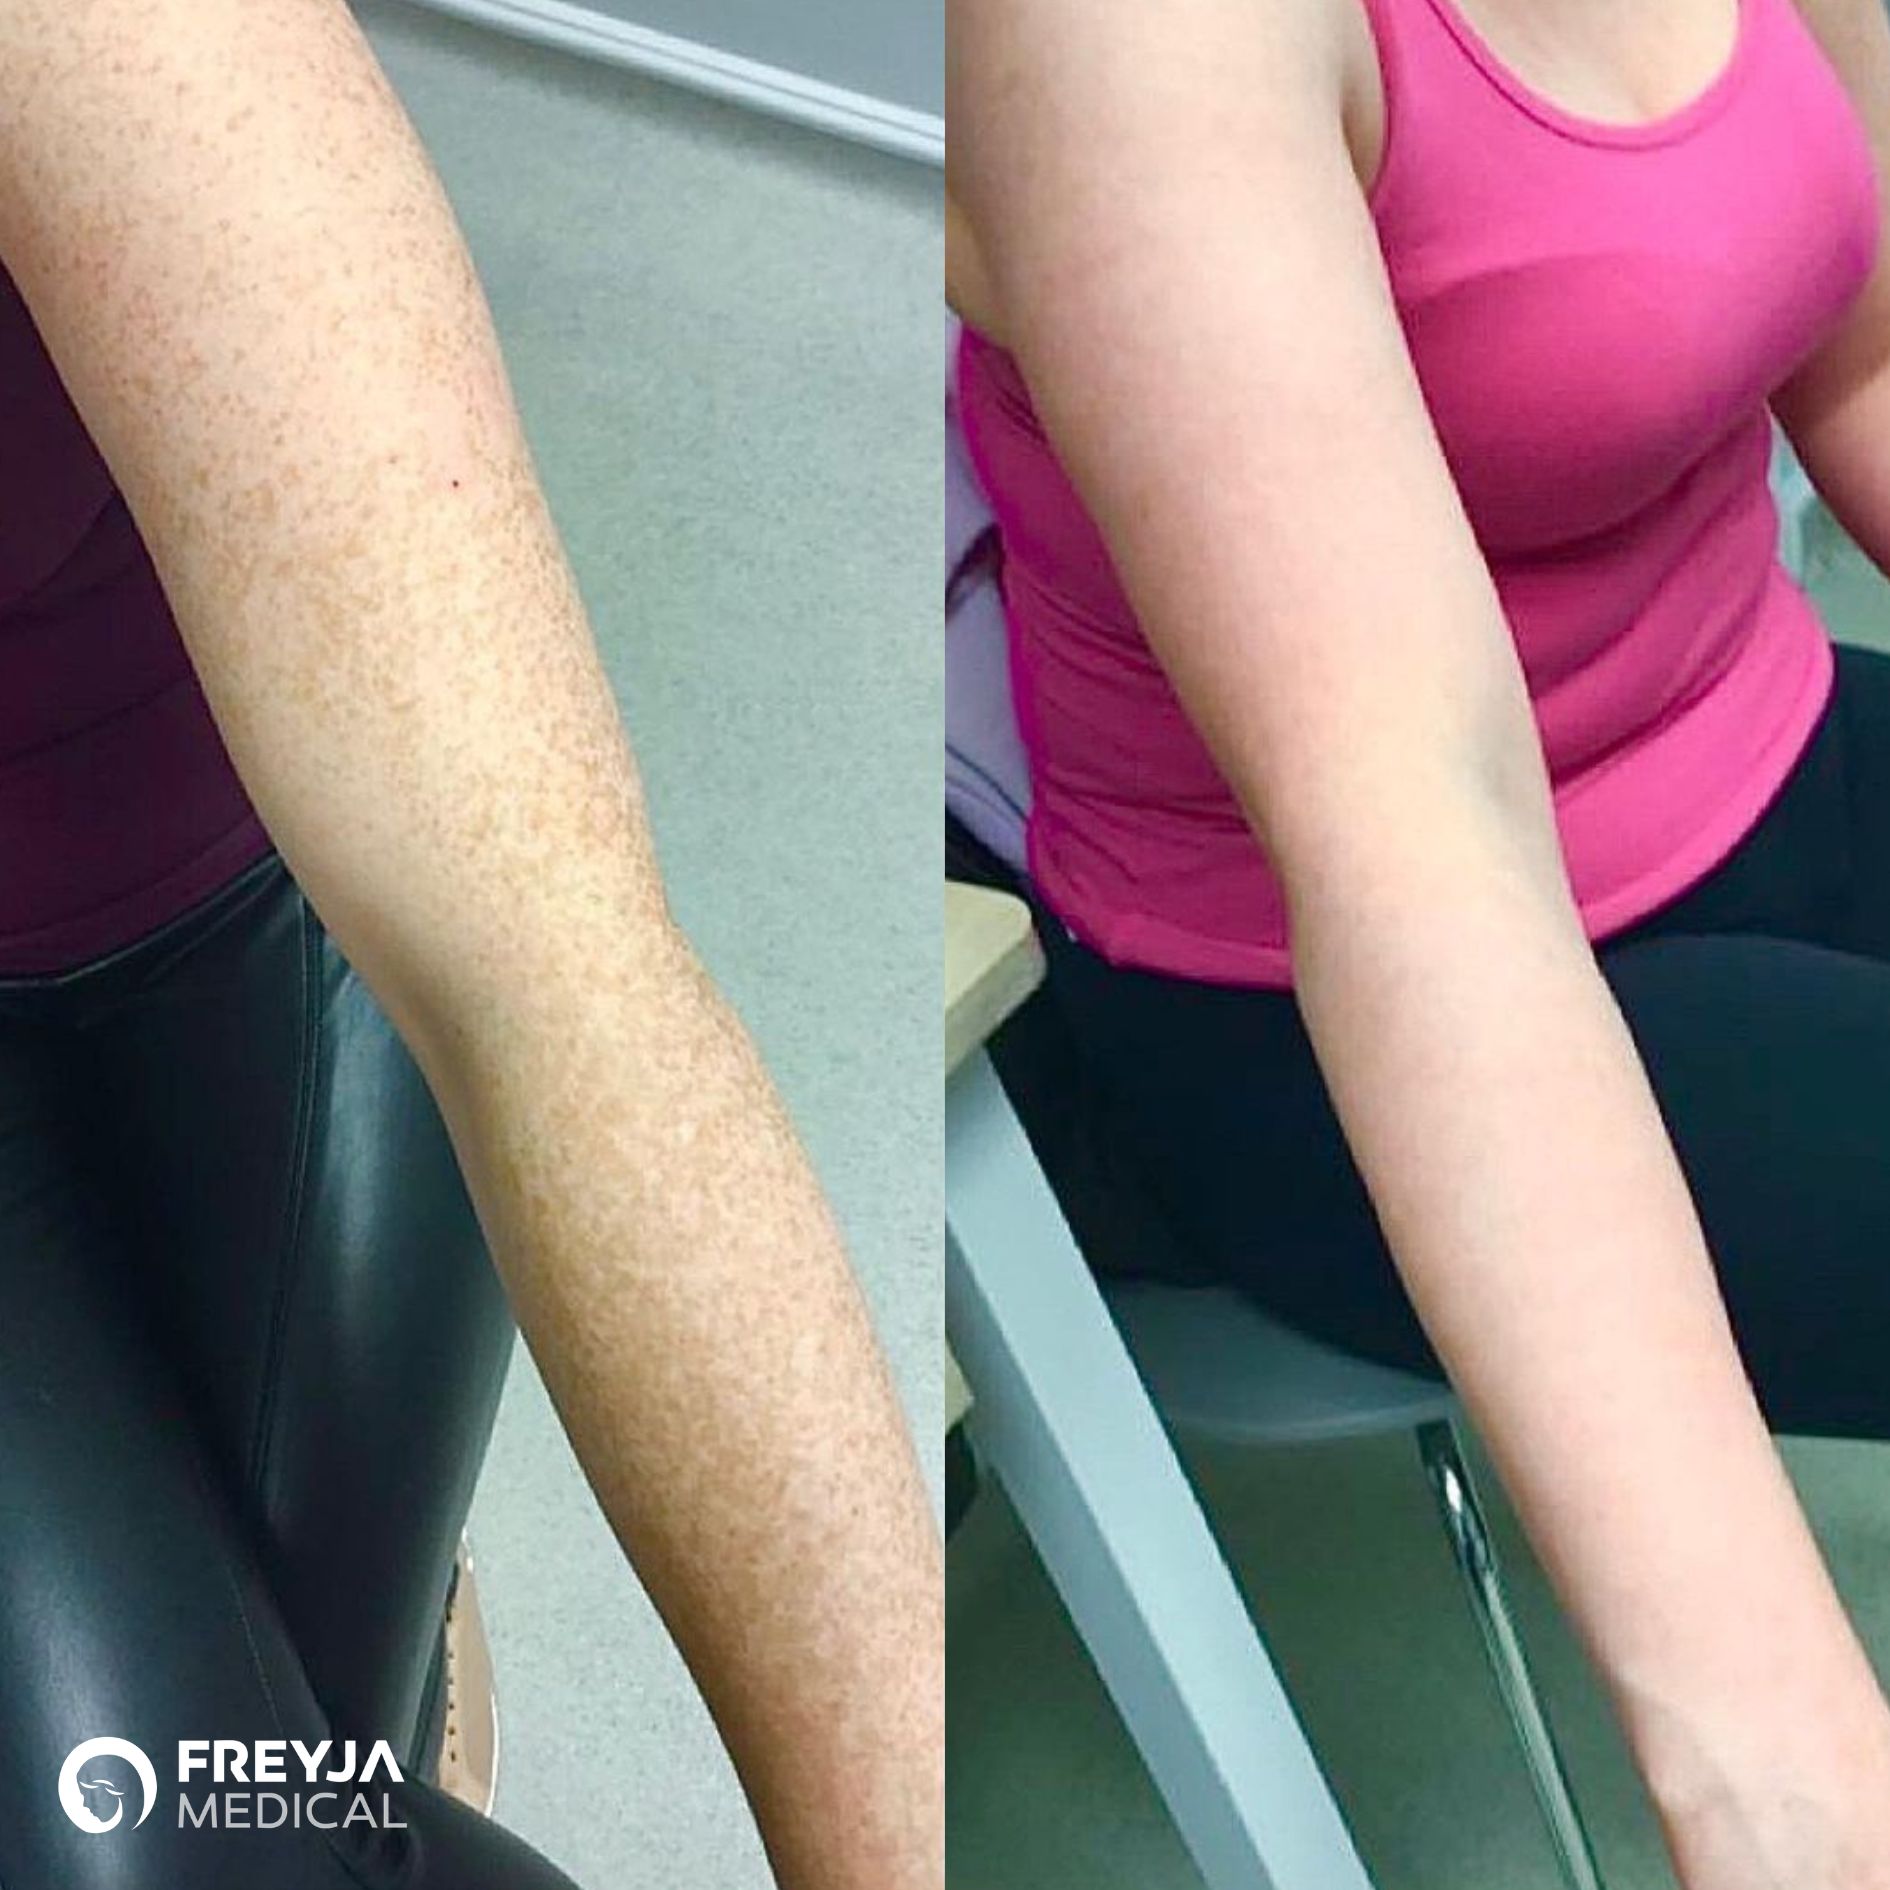 Uneven Skin Tone / Pigmentation, before and after IPL treatment at Freyja Medical